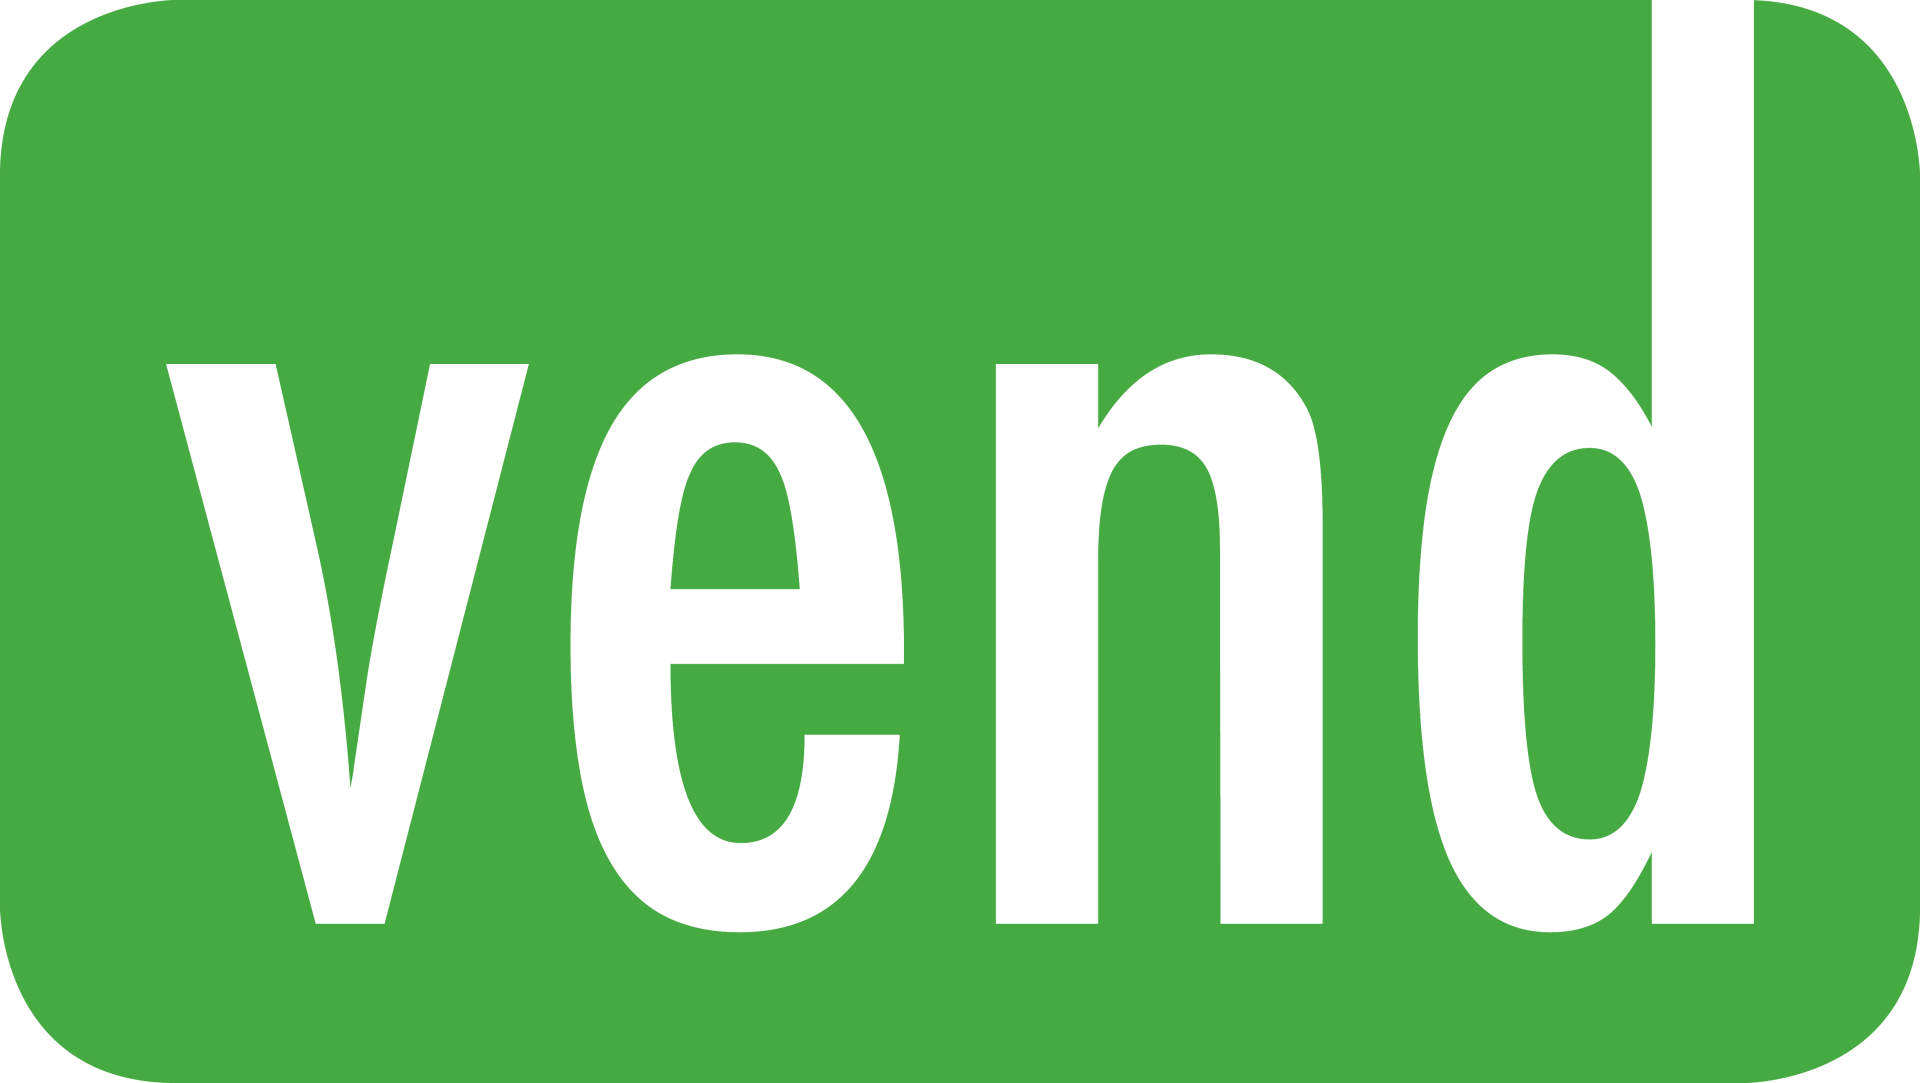 Vend green and white Logo. A cloud-based point-of-sale and retail management software company based in Auckland, New Zealand.